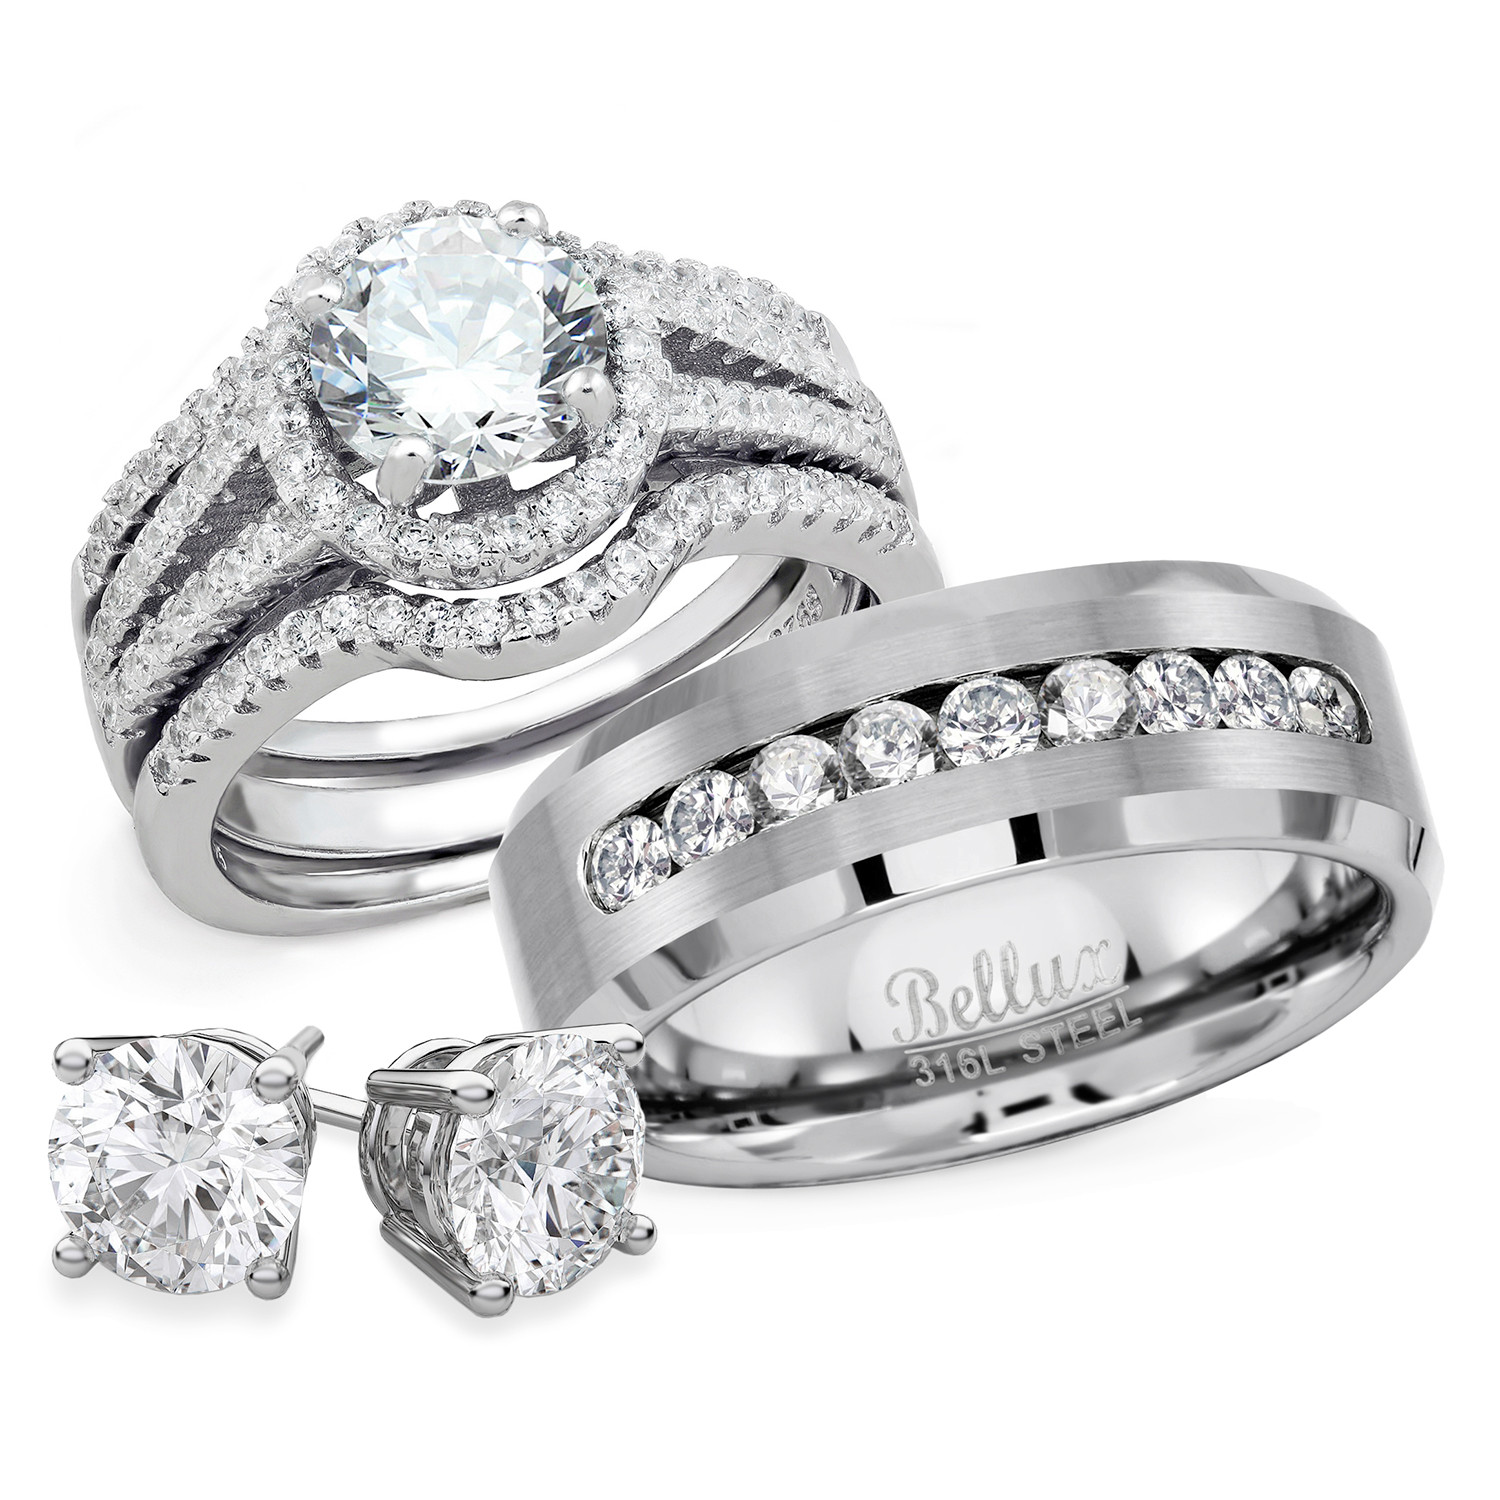 Wedding Rings Sets At Walmart
 Bellux Style His and Hers Wedding Engagement Anniversary